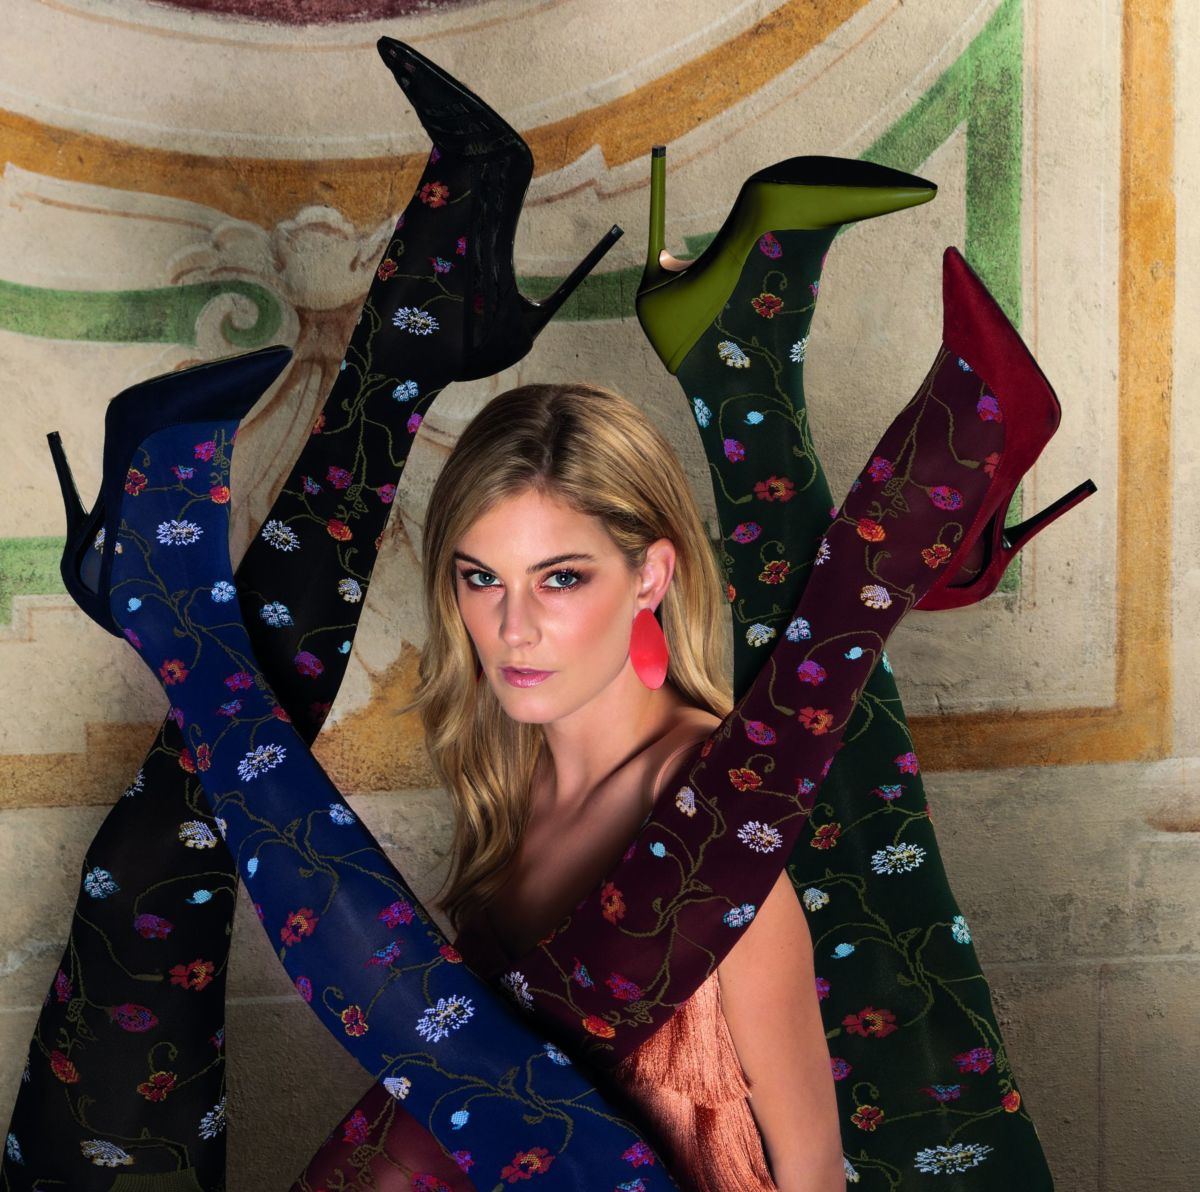 Trasparenze Platino Collant - Soft opaque fashion tights with a multicoloured woven floral pattern, available in black, blue navy, dark green and wine